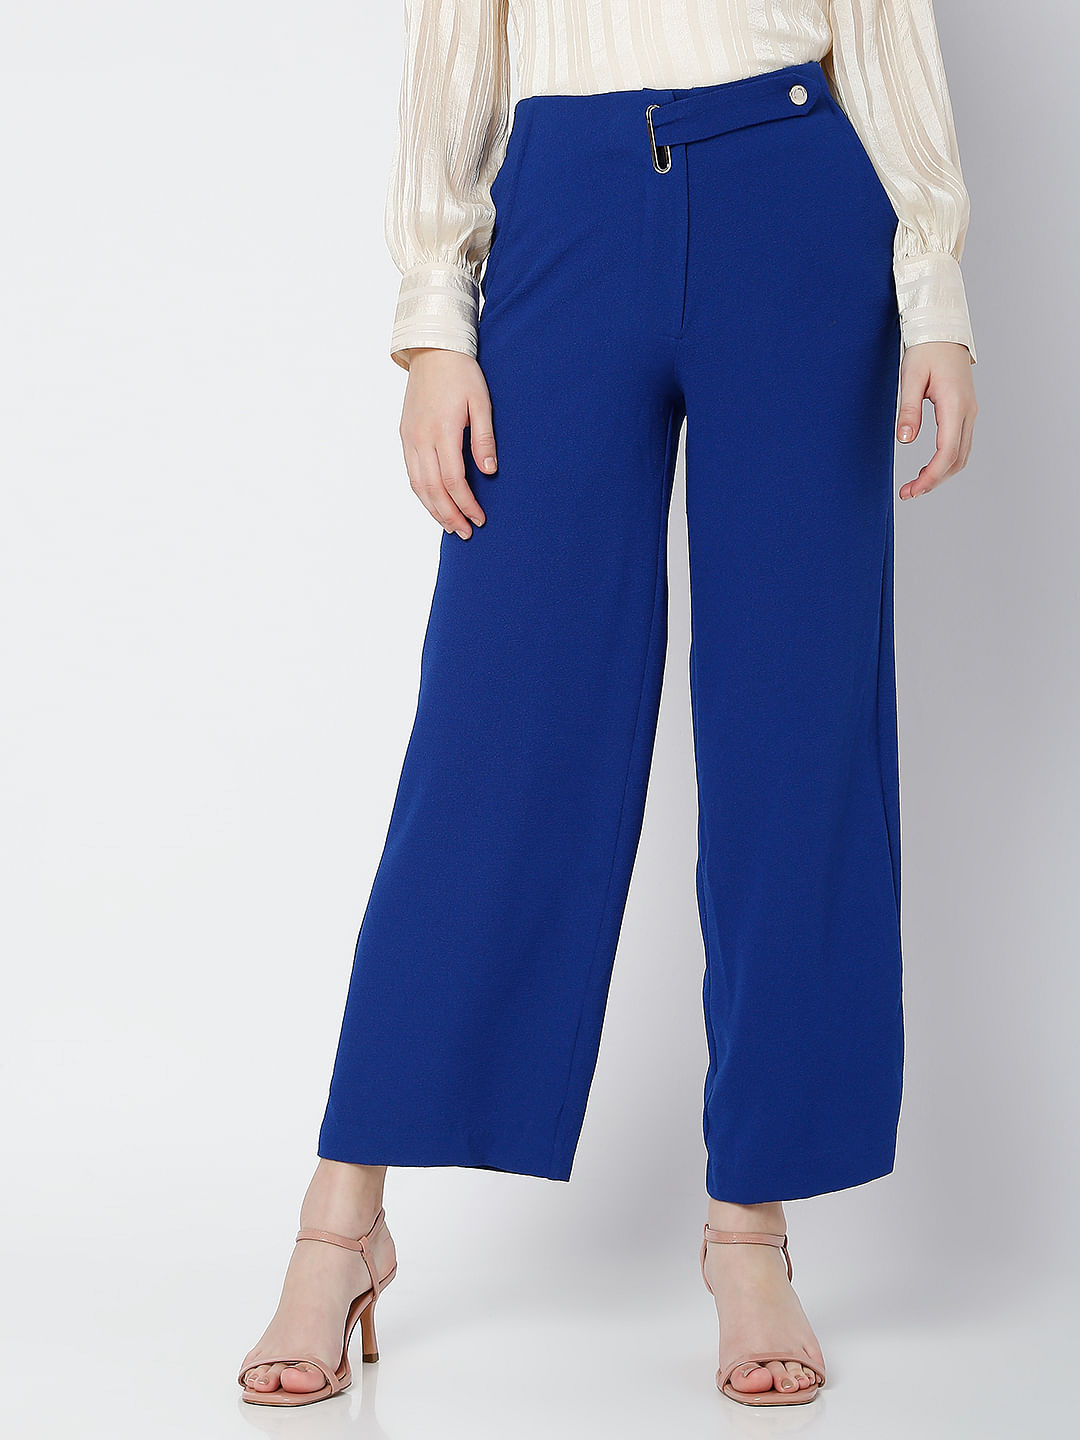 Buy Women Light Blue Wide Legged Belted Pants  Formal Trousers Online  India  FabAlley